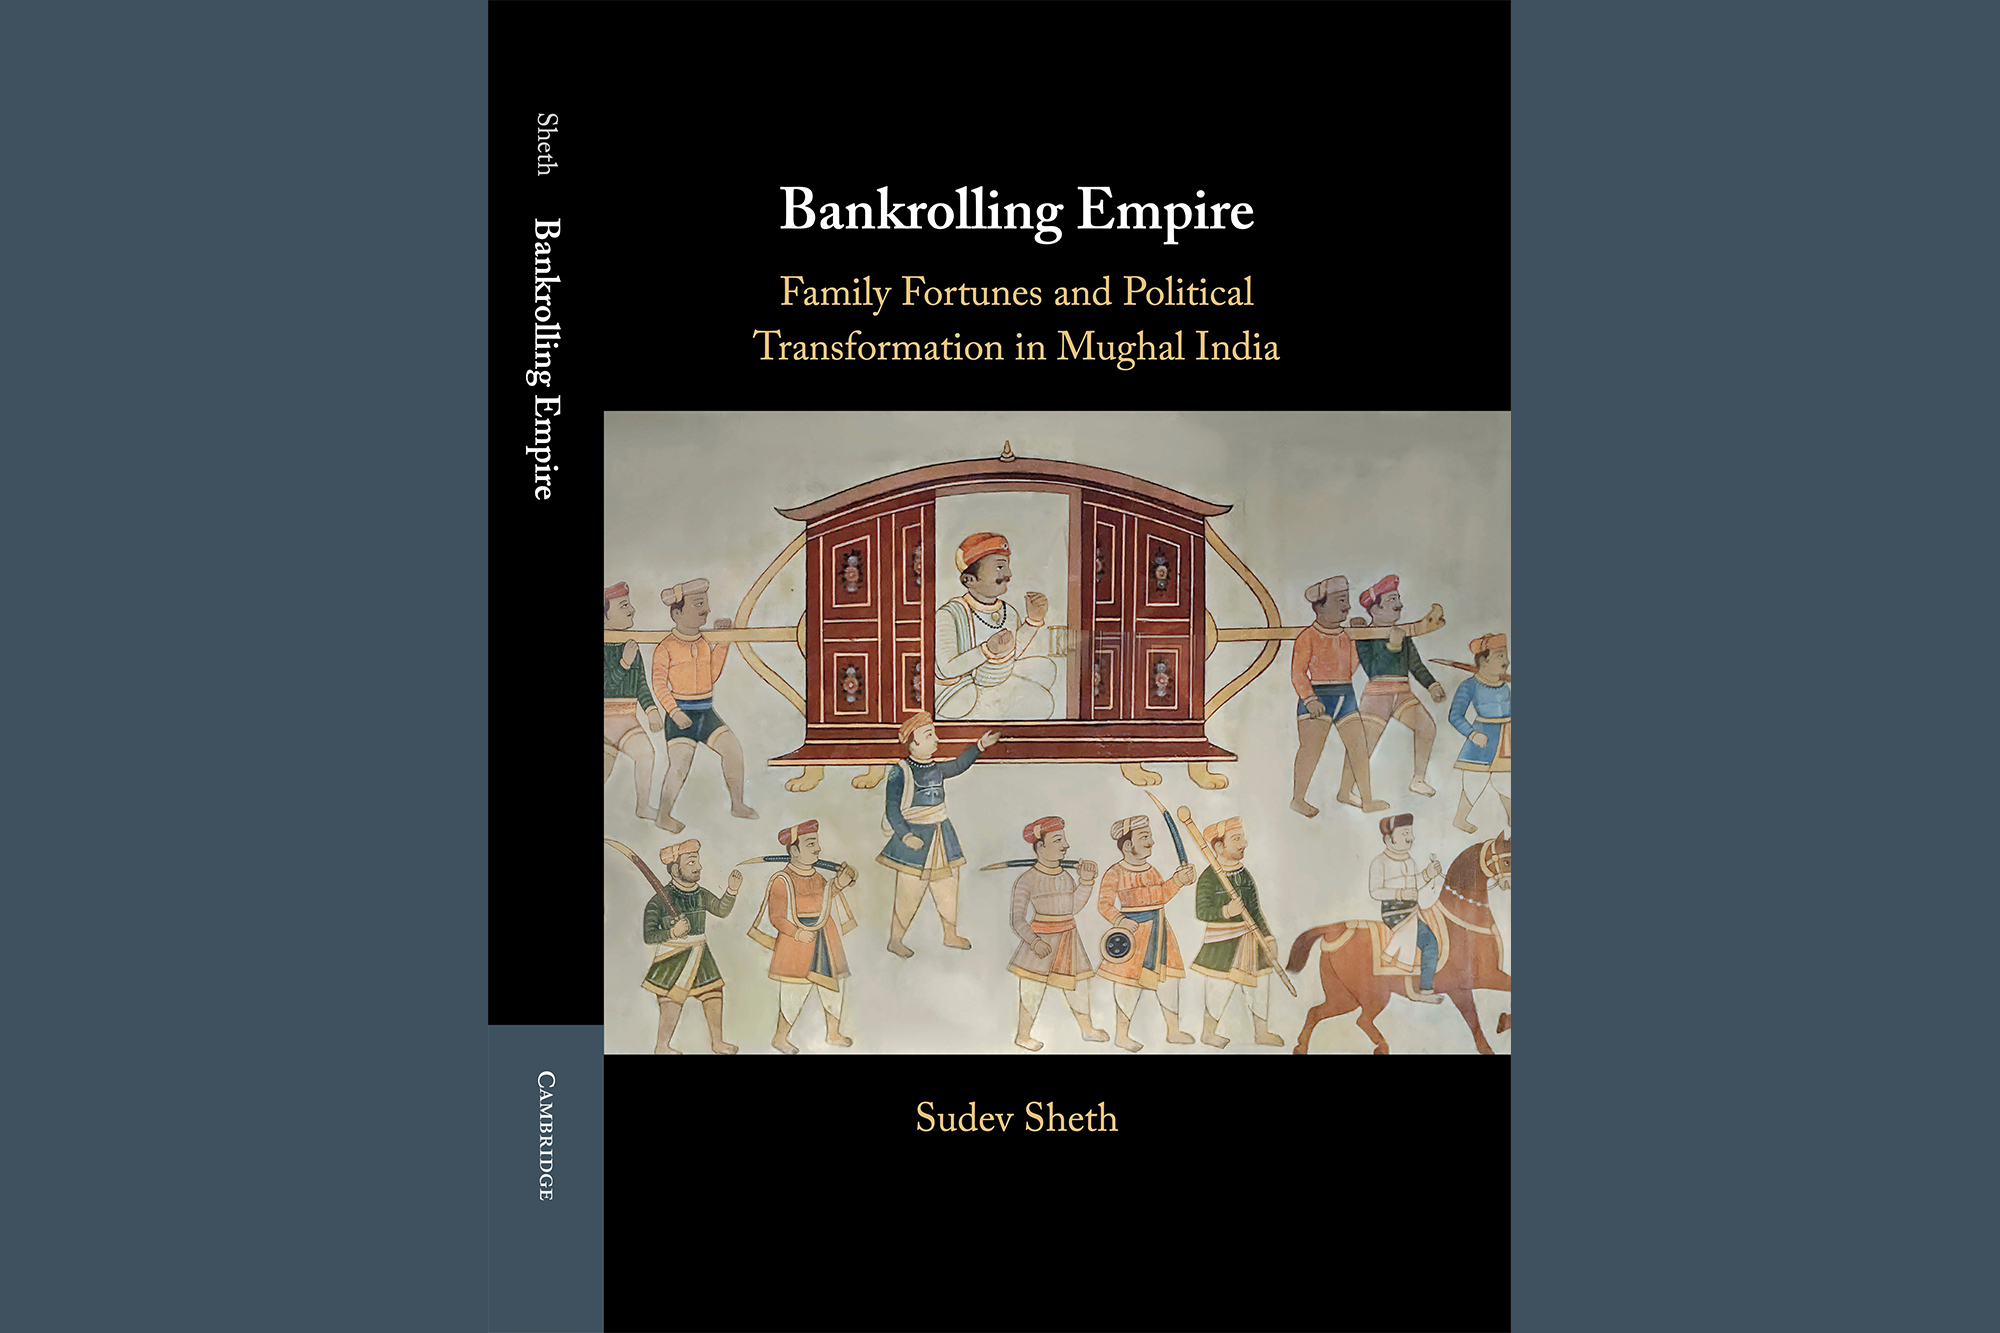 Front of book jacket reading "Bankrolling Empire: Family Fortunes and Political Transformation in Mughal India"